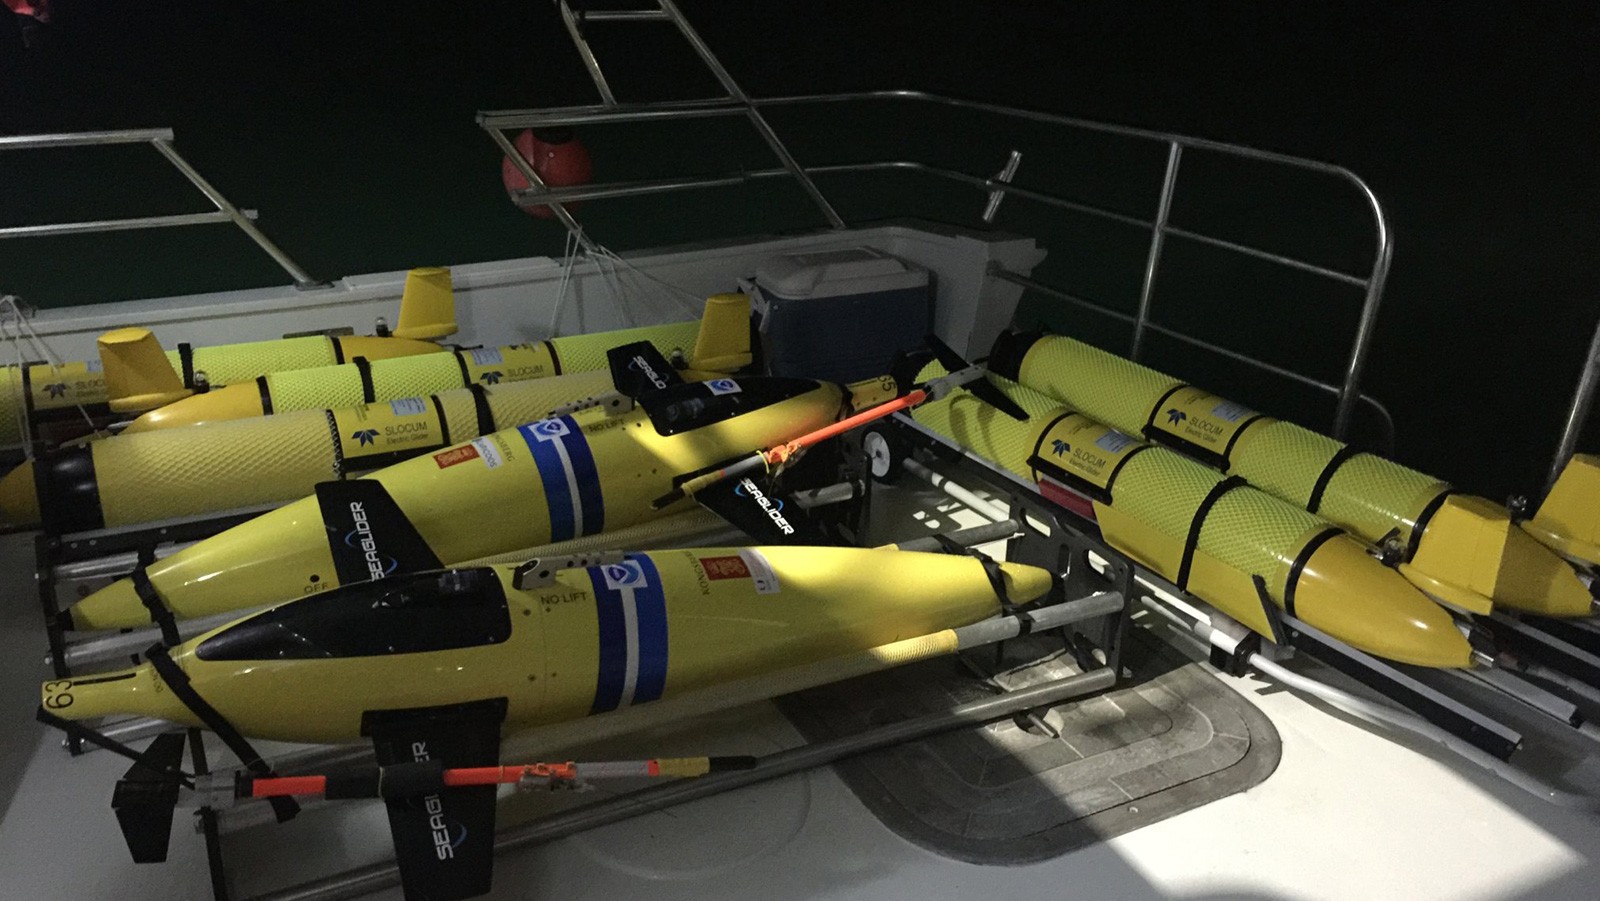 Numerous underwater gliders on the deck of a ship for the hurricane glider project.